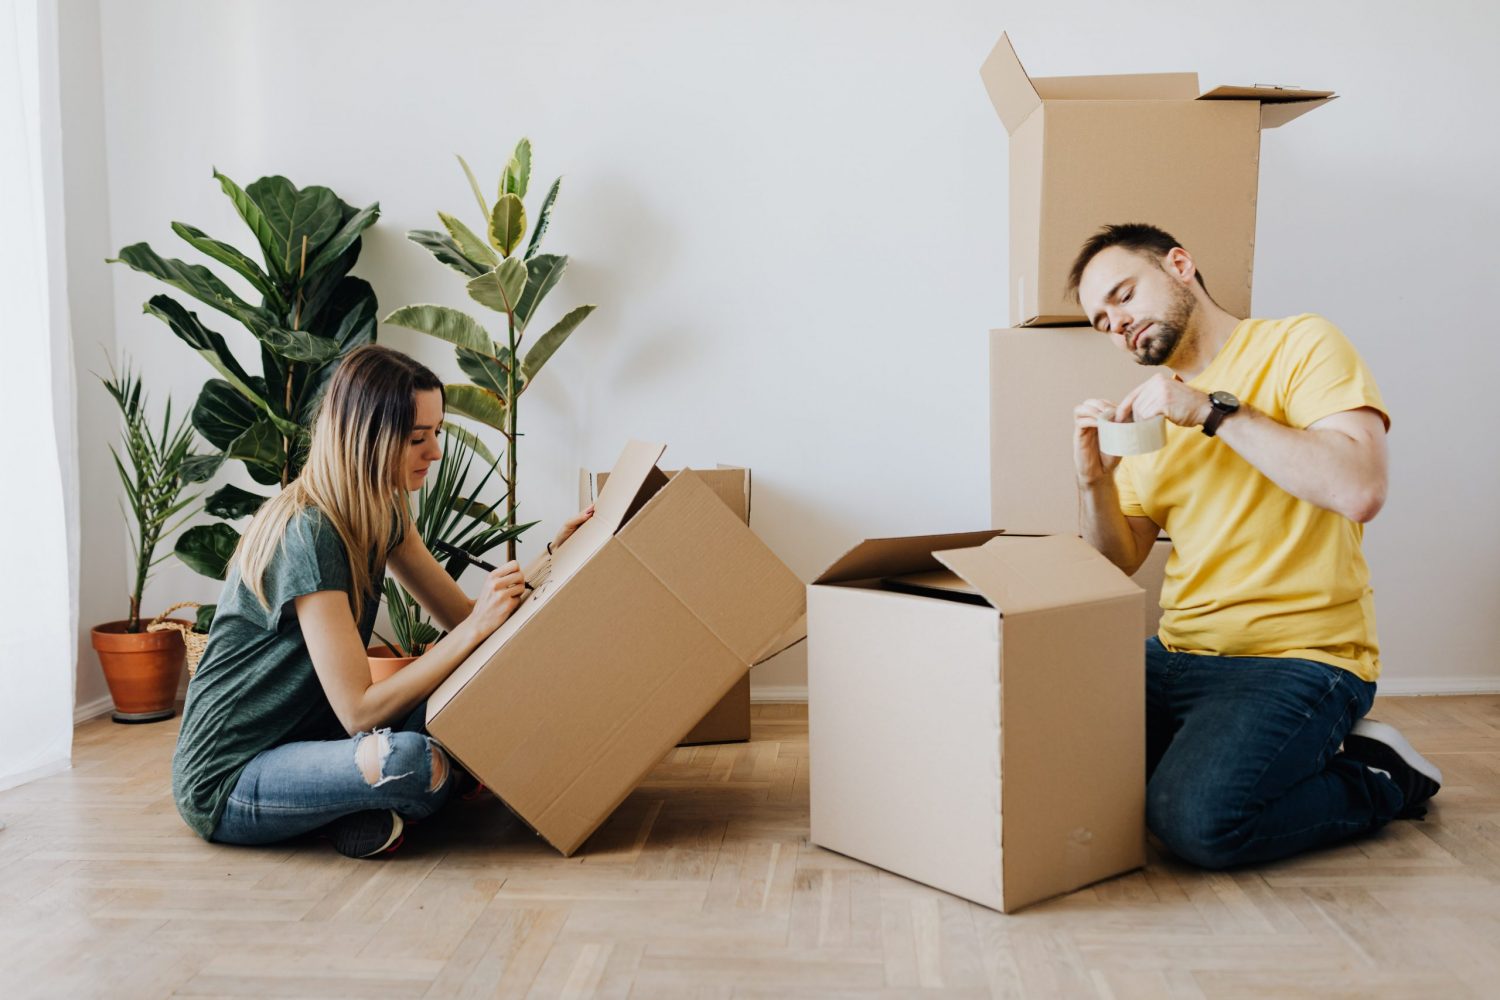 content-couple-packing-belongings-into-carton-boxes-4506258